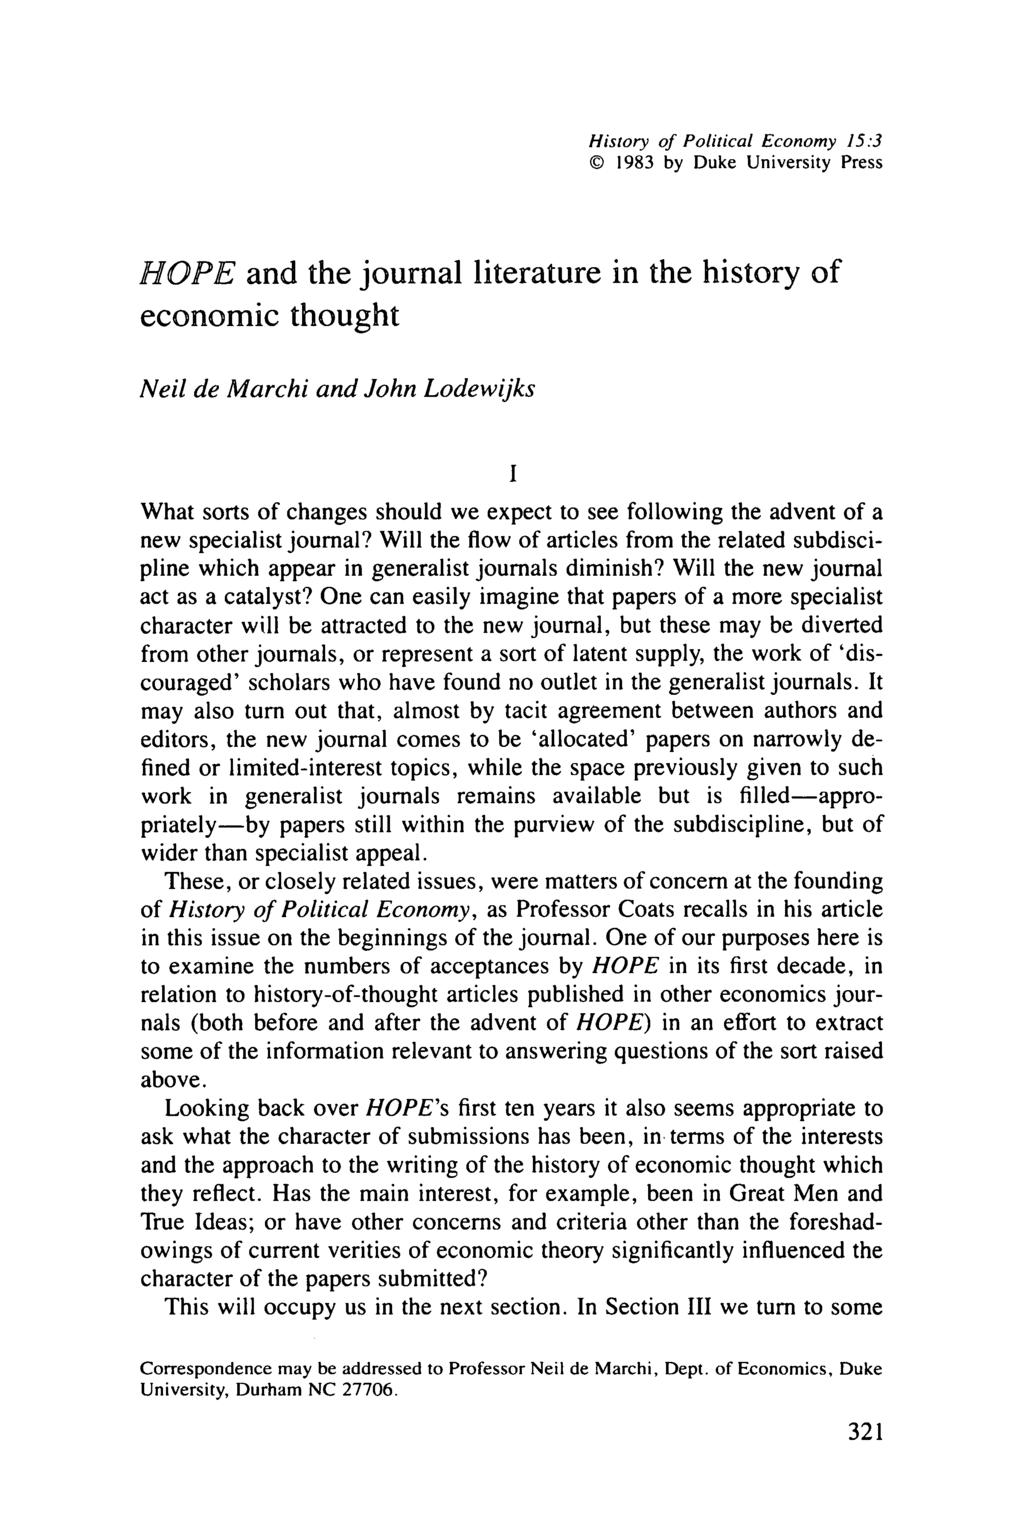 History of Political Econoy 5:3 0 983 by Duke University Press HQPE and the journal literature in the history of econoic thought eil de Marchi and John Lodewijks I What sorts of changes should we